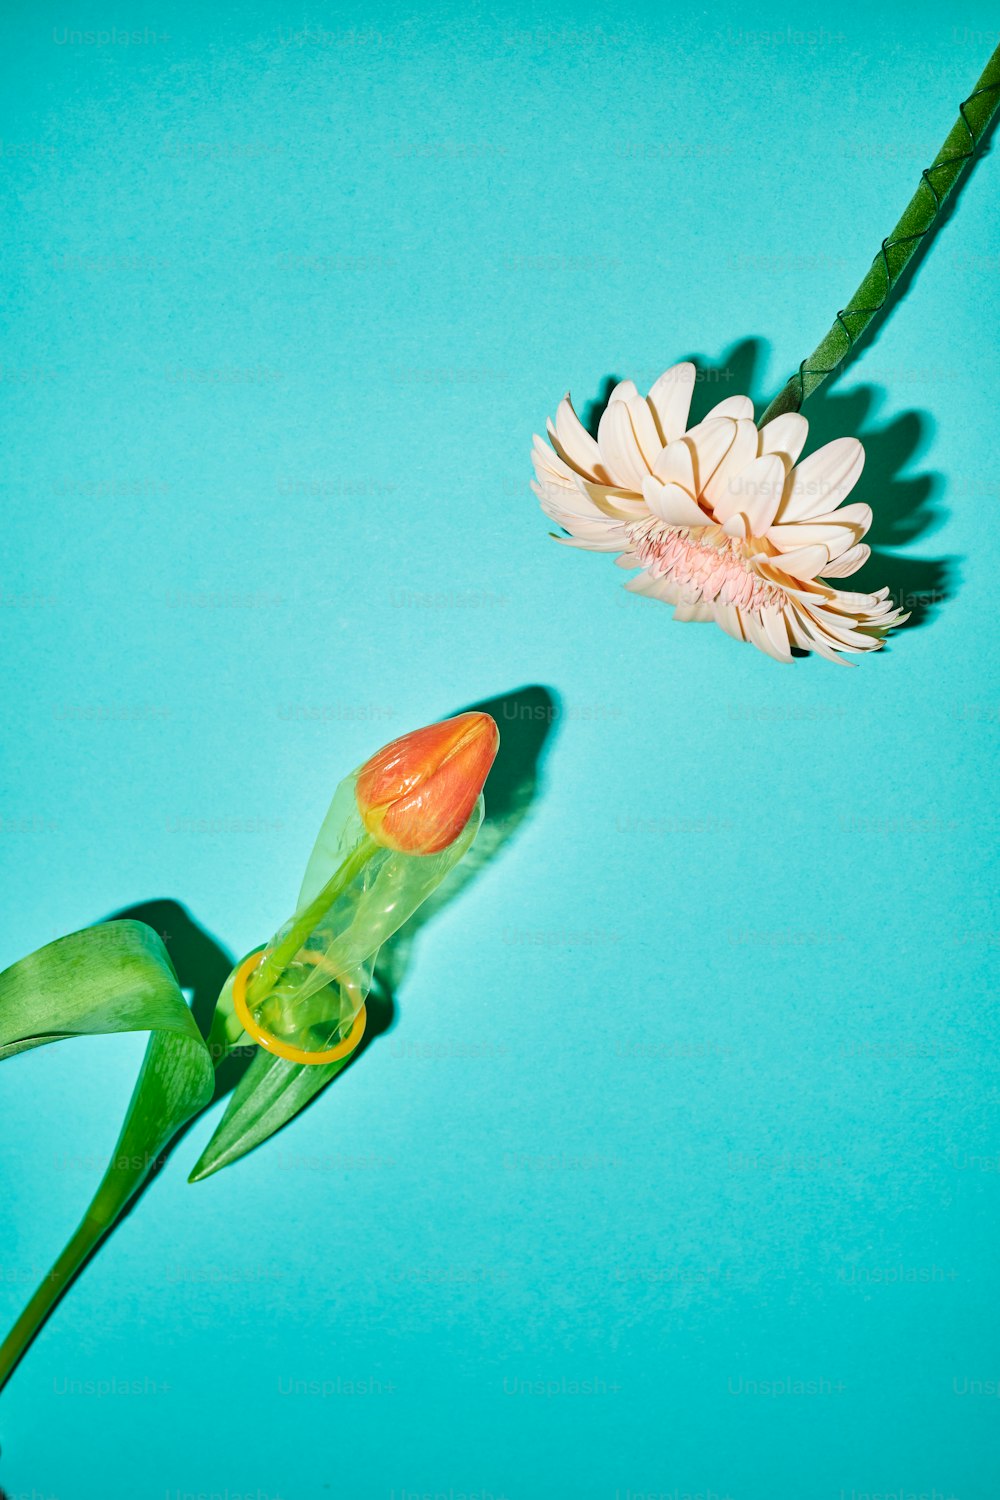 a flower and a bud on a blue background